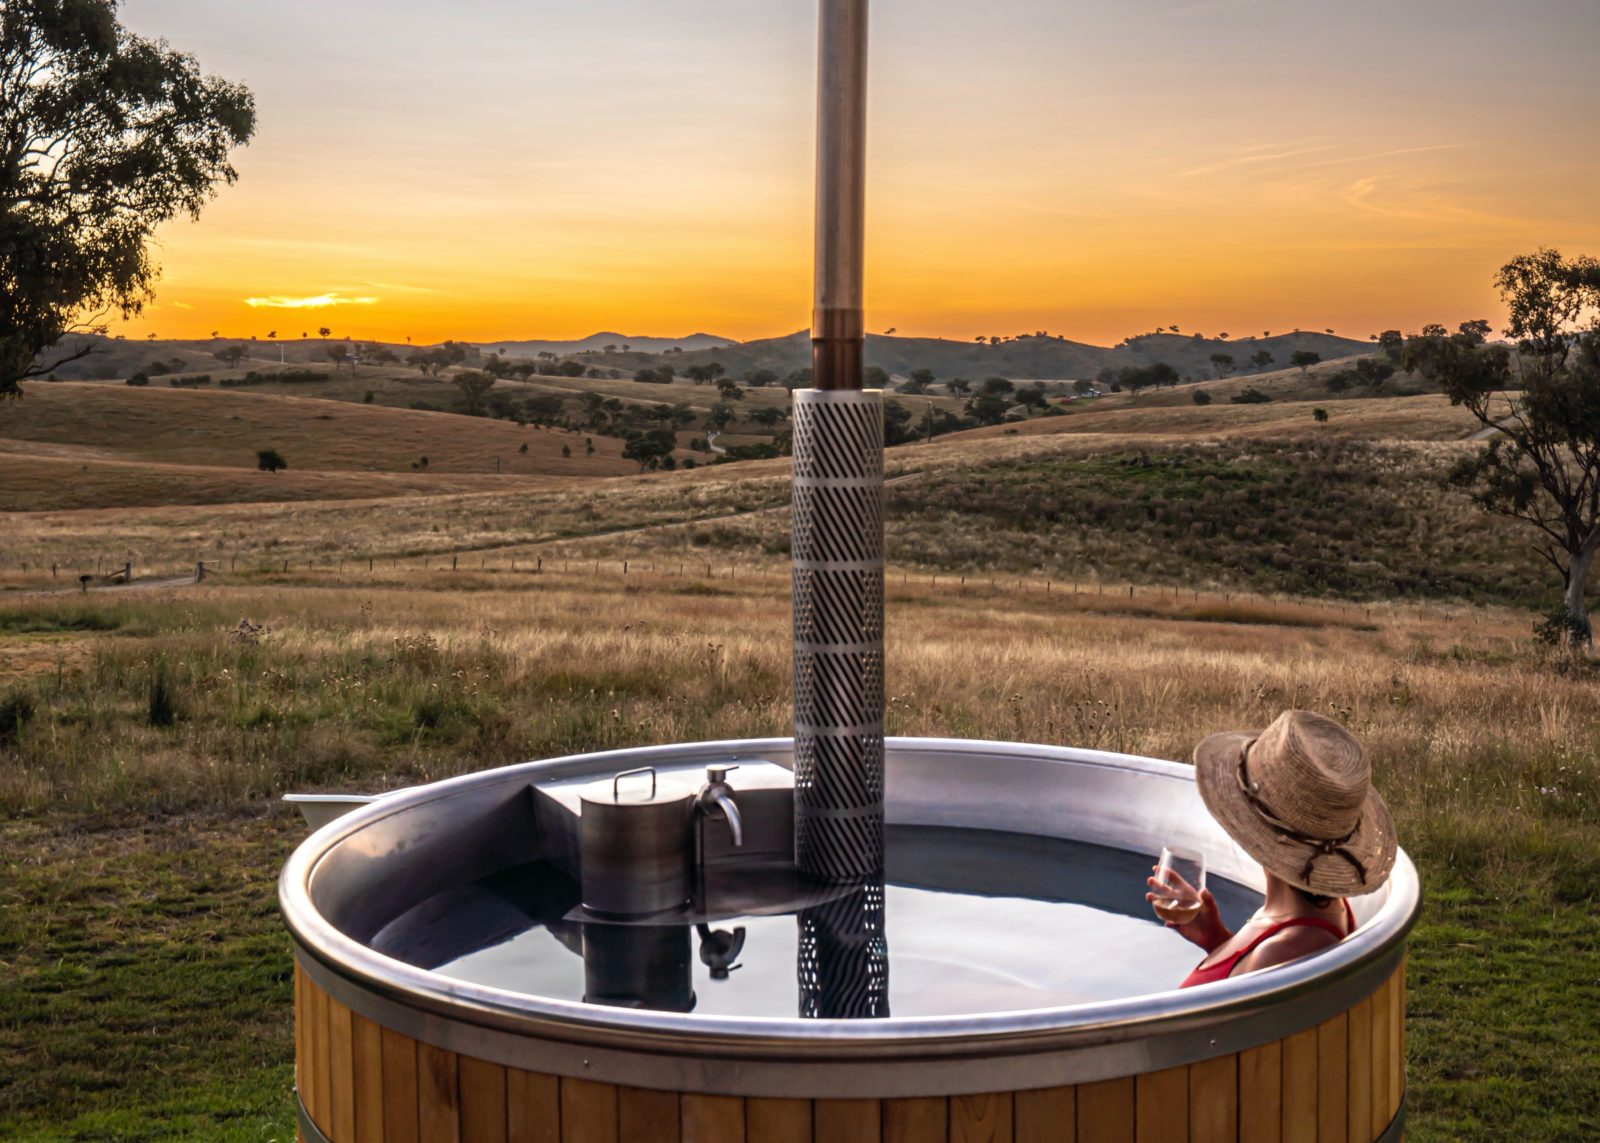 Enjoy watching the sunset in our wood fired hot tub sipping some Mudgee Wine